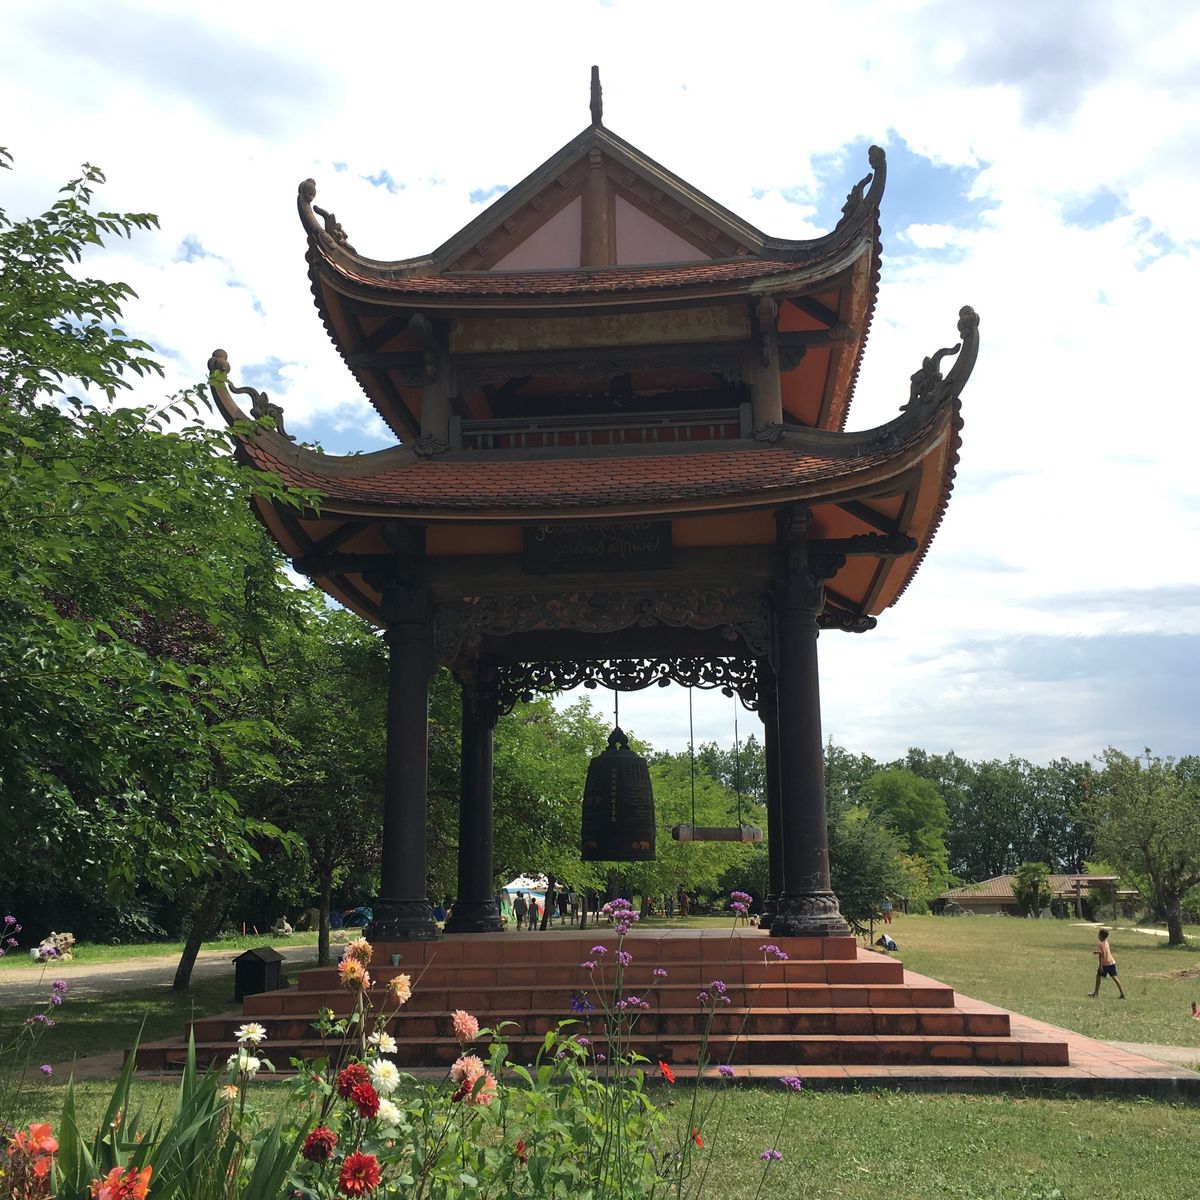 How and Why I Ended up at a Buddhist Monastery